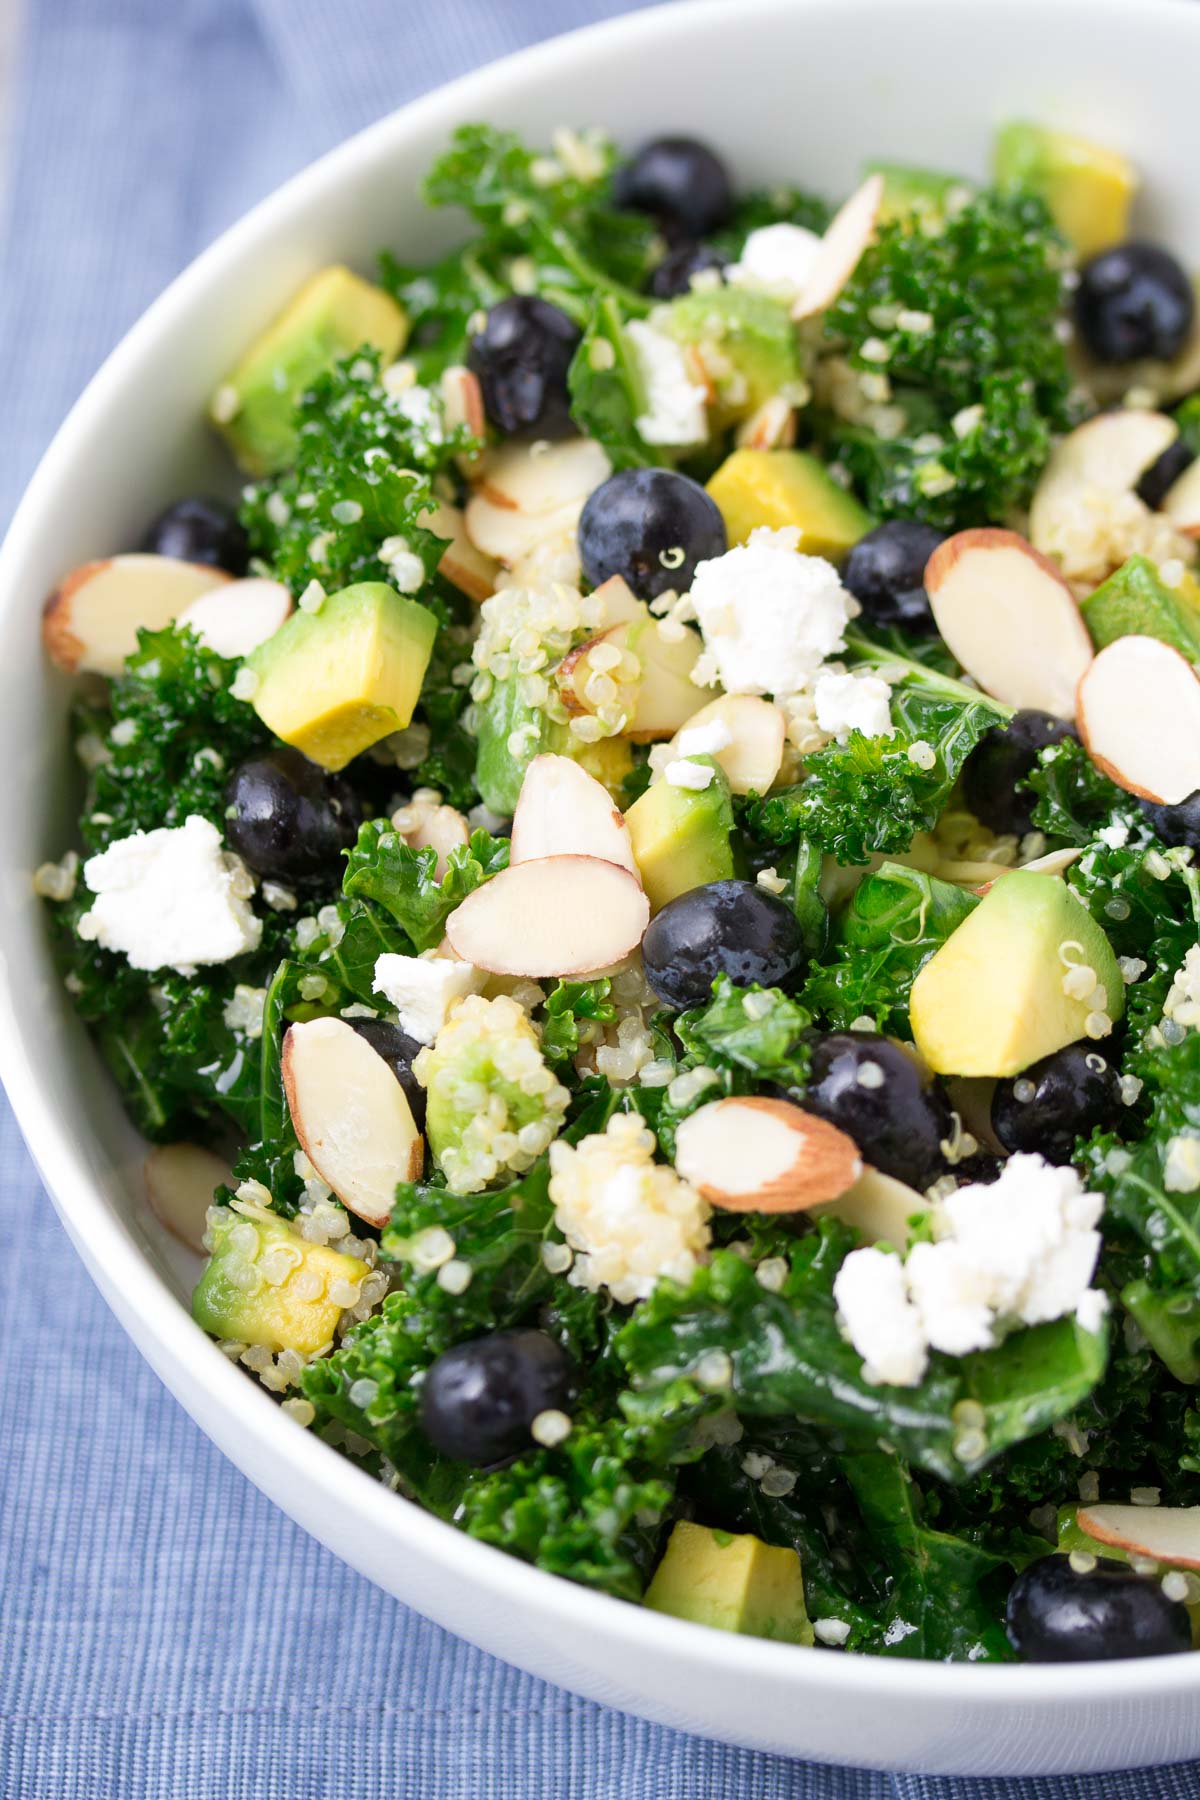 Kale salad with quinoa and blueberries in a white bowl.